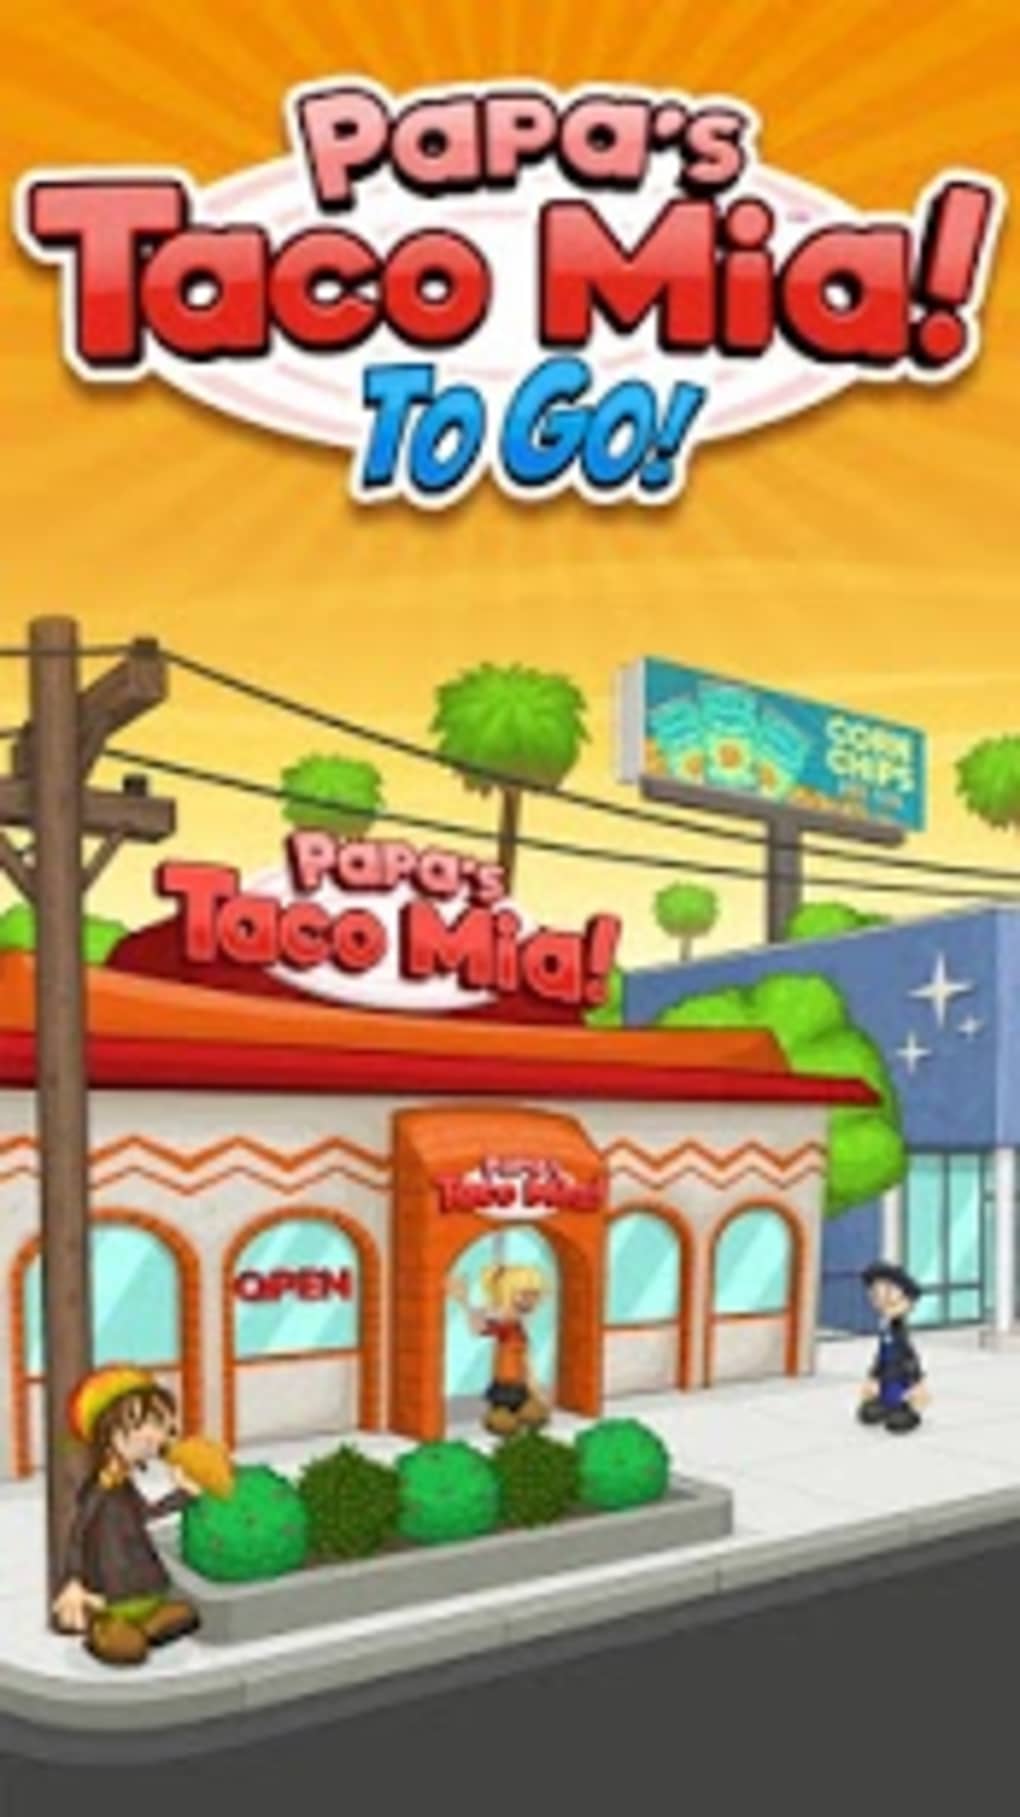 Papa's Cupcakeria To Go! Mod apk [Paid for free][Unlimited money][Unlocked][Full]  download - Papa's Cupcakeria To Go! MOD apk 1.1.4 free for Android.